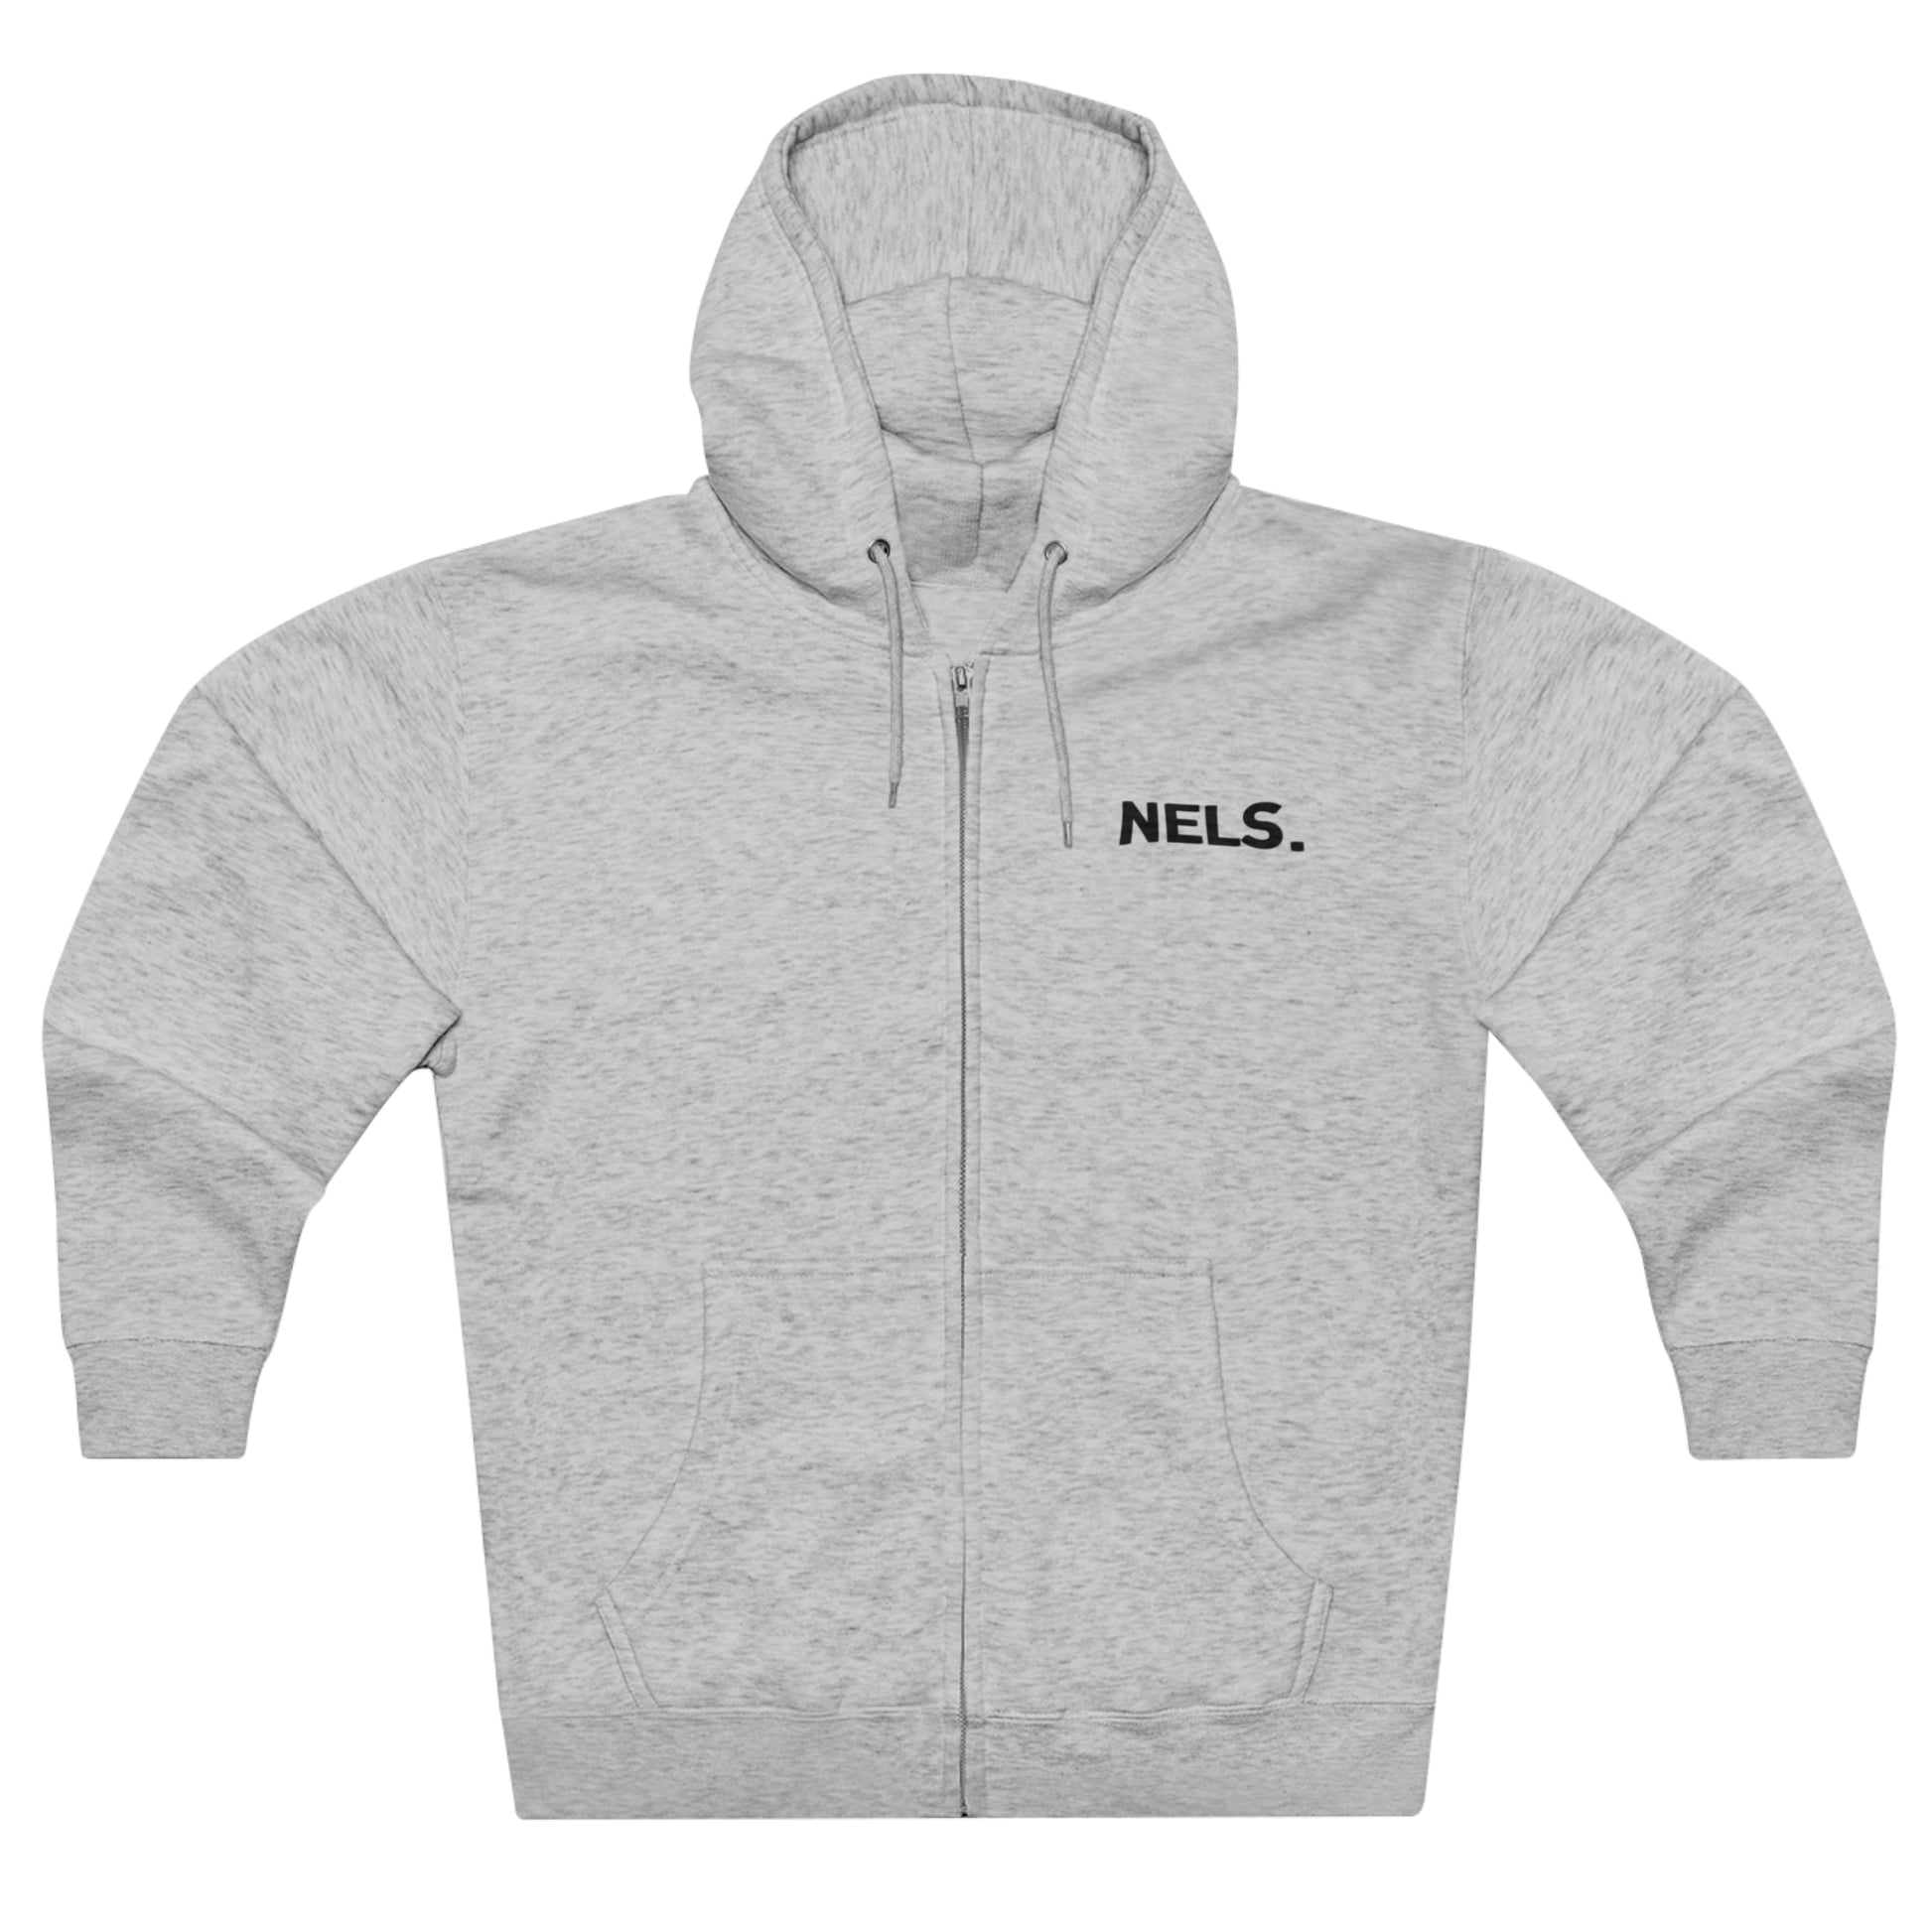 Zip Hoodie NELS. 'PARANOID' Front and Back - NELS.